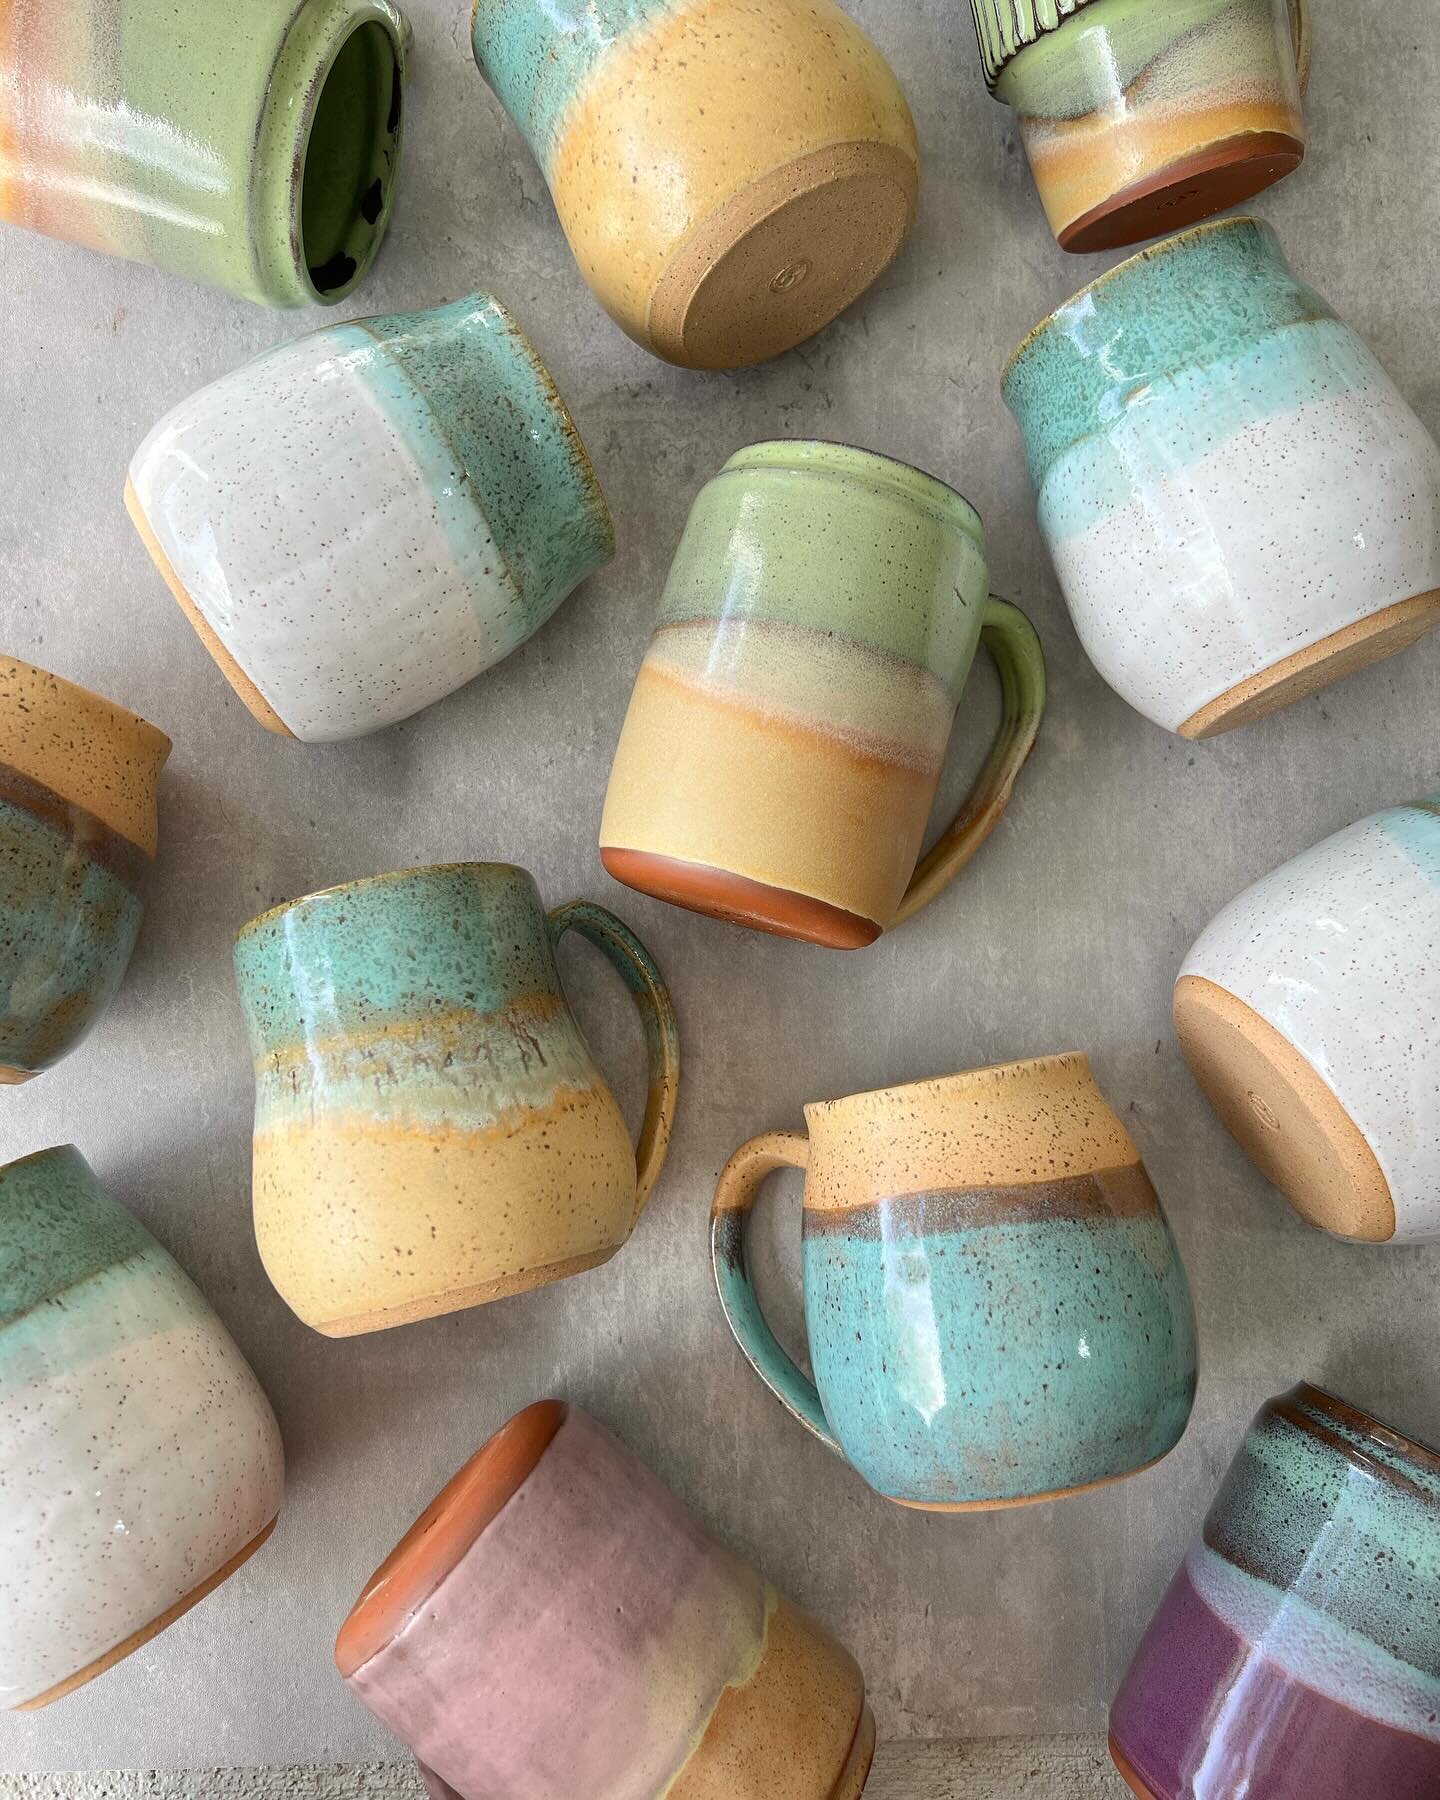 New kiln load = new post! I am just swooning over these spring and summer colorways on these ceramic mugs. They are transporting me to a tropical beach, where I am desperately dreaming of being. 

Also! Since Im having a baby and moving cities, I&rsq